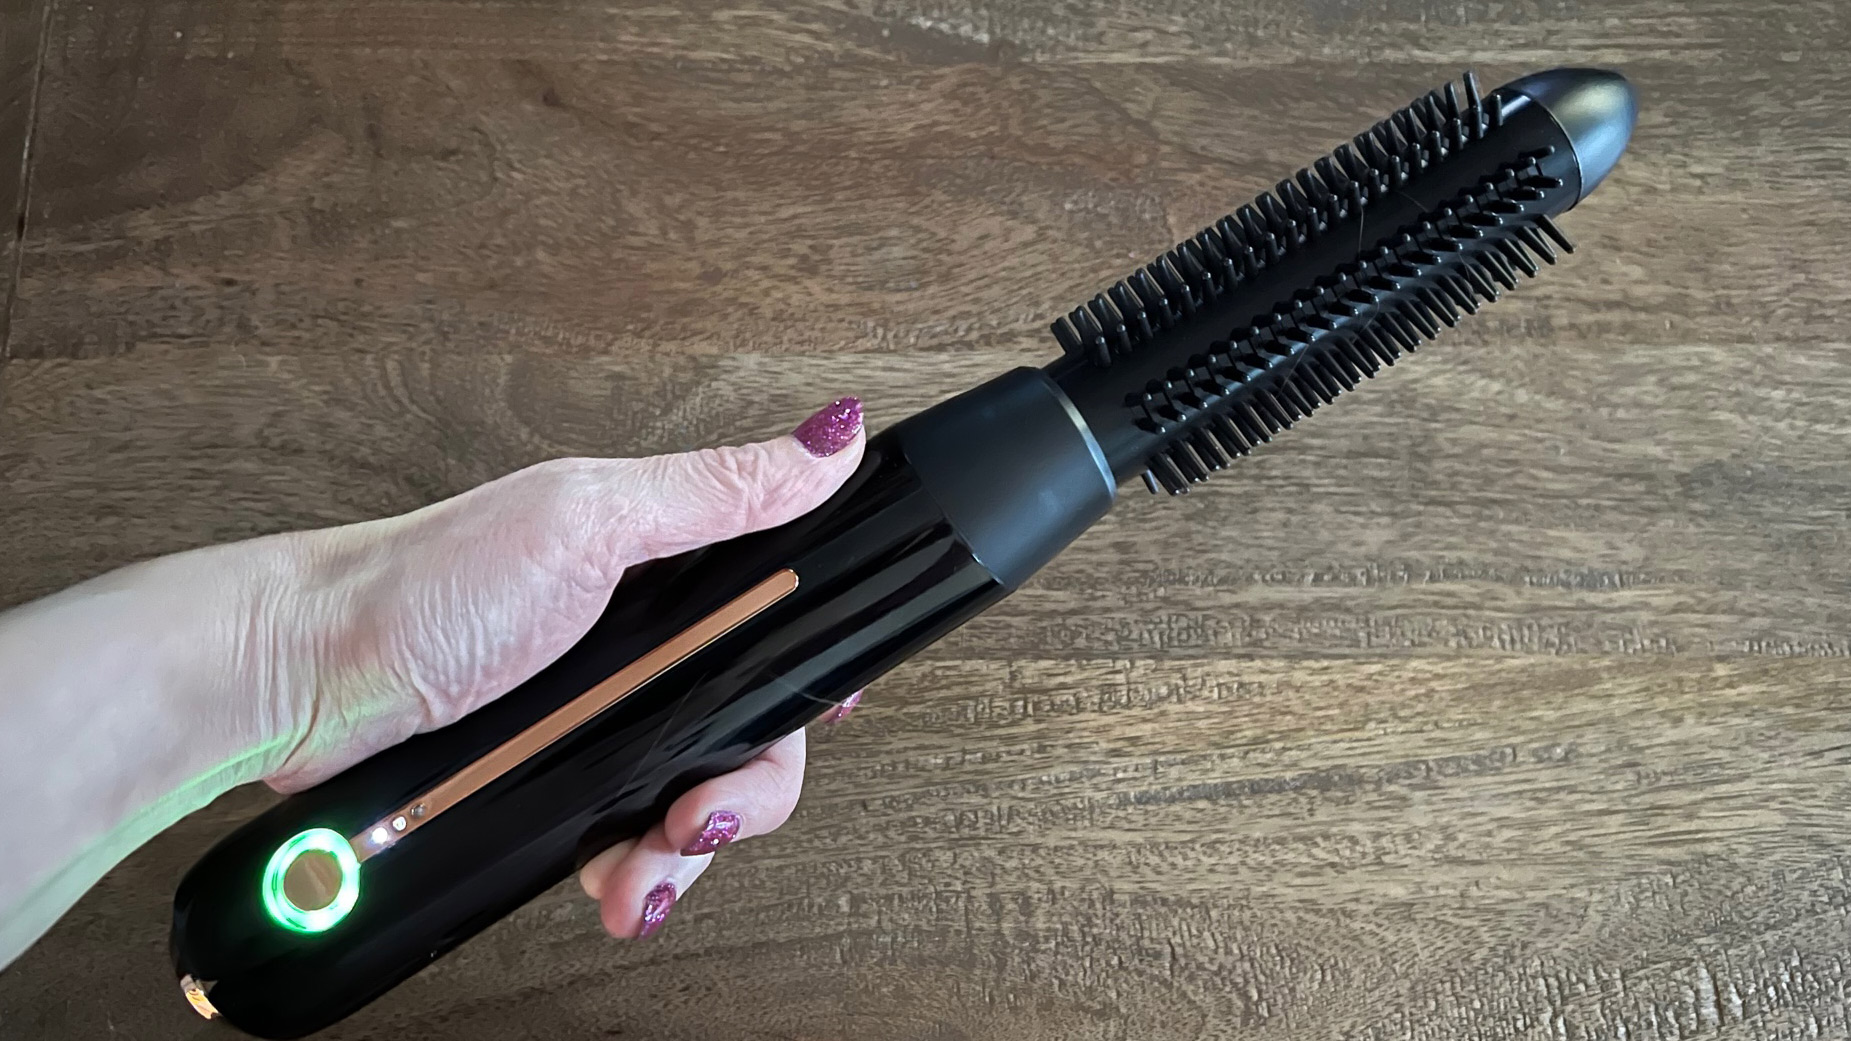 The BaByliss 900 cordless hot brush being held ready to use